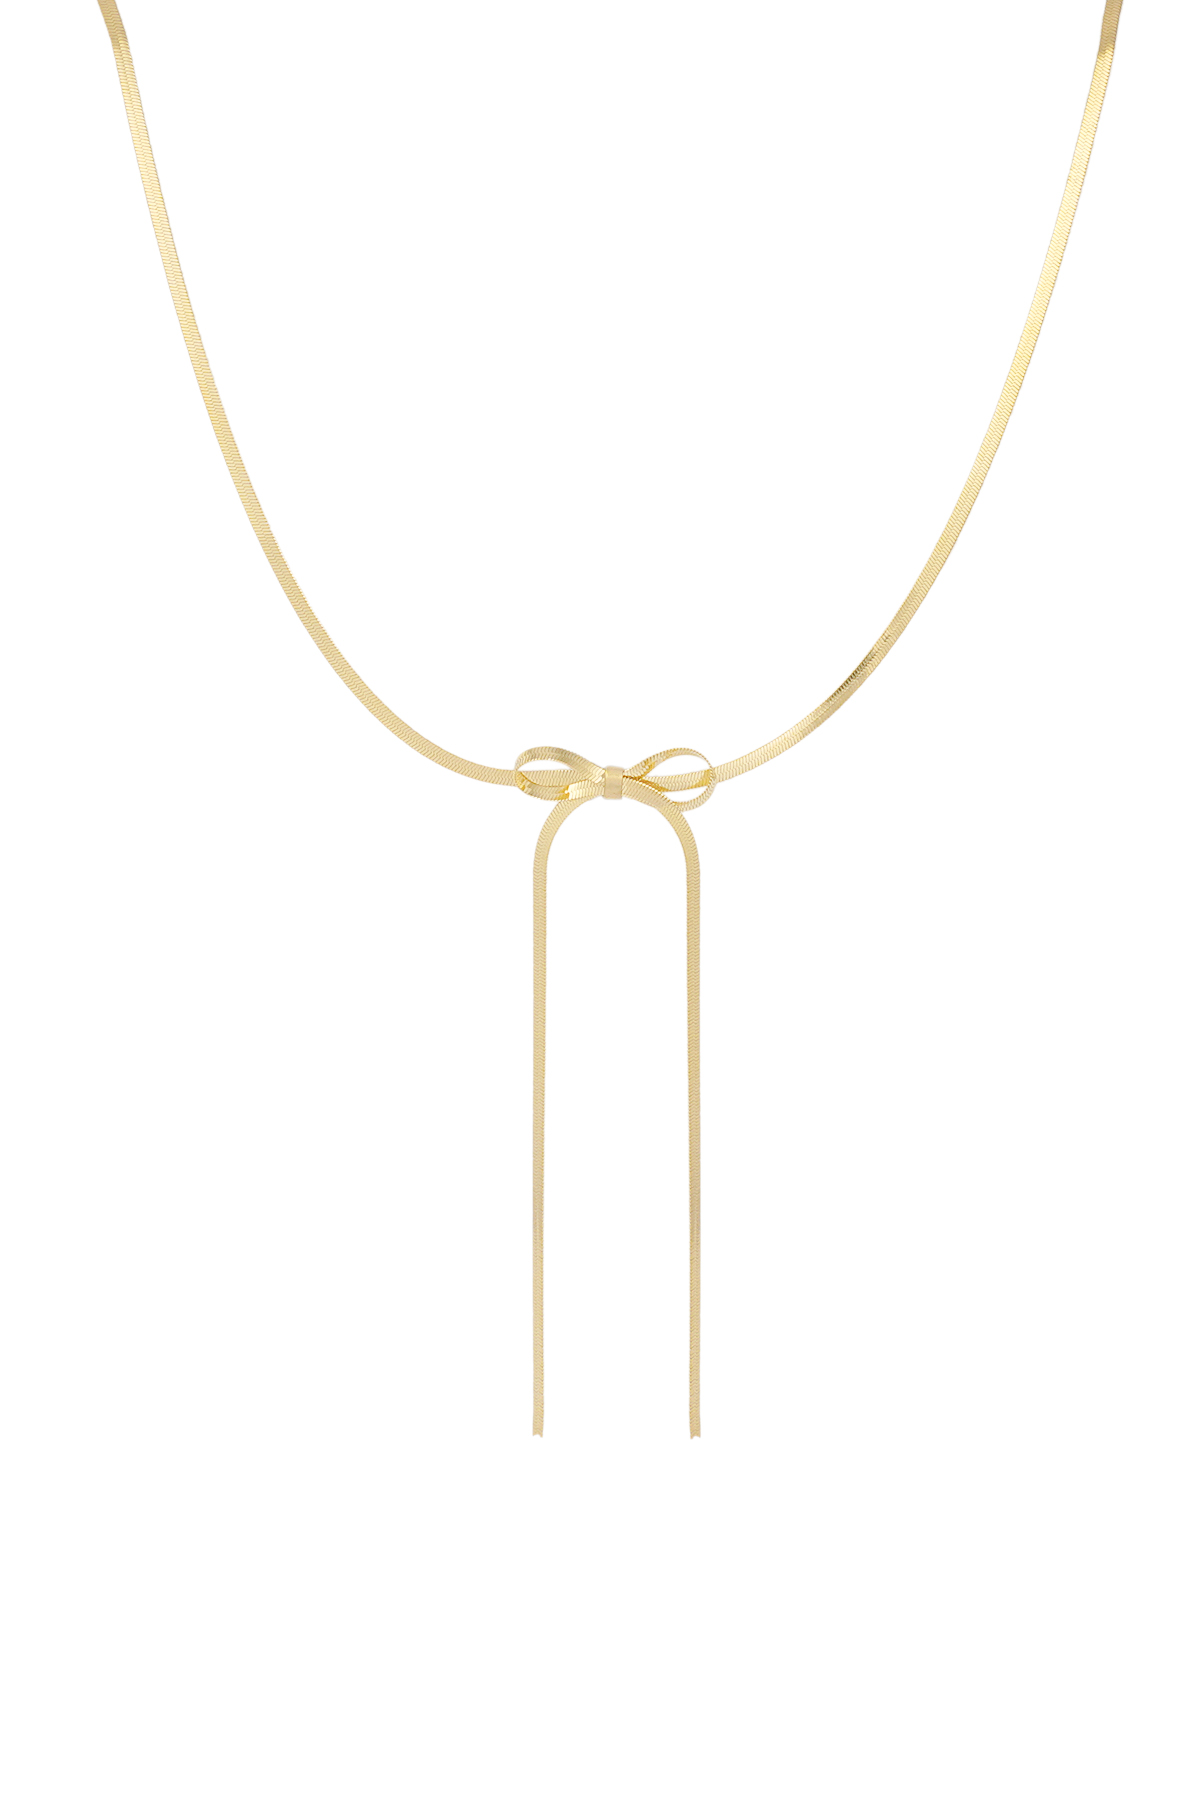 Flat link necklace with long bow - gold